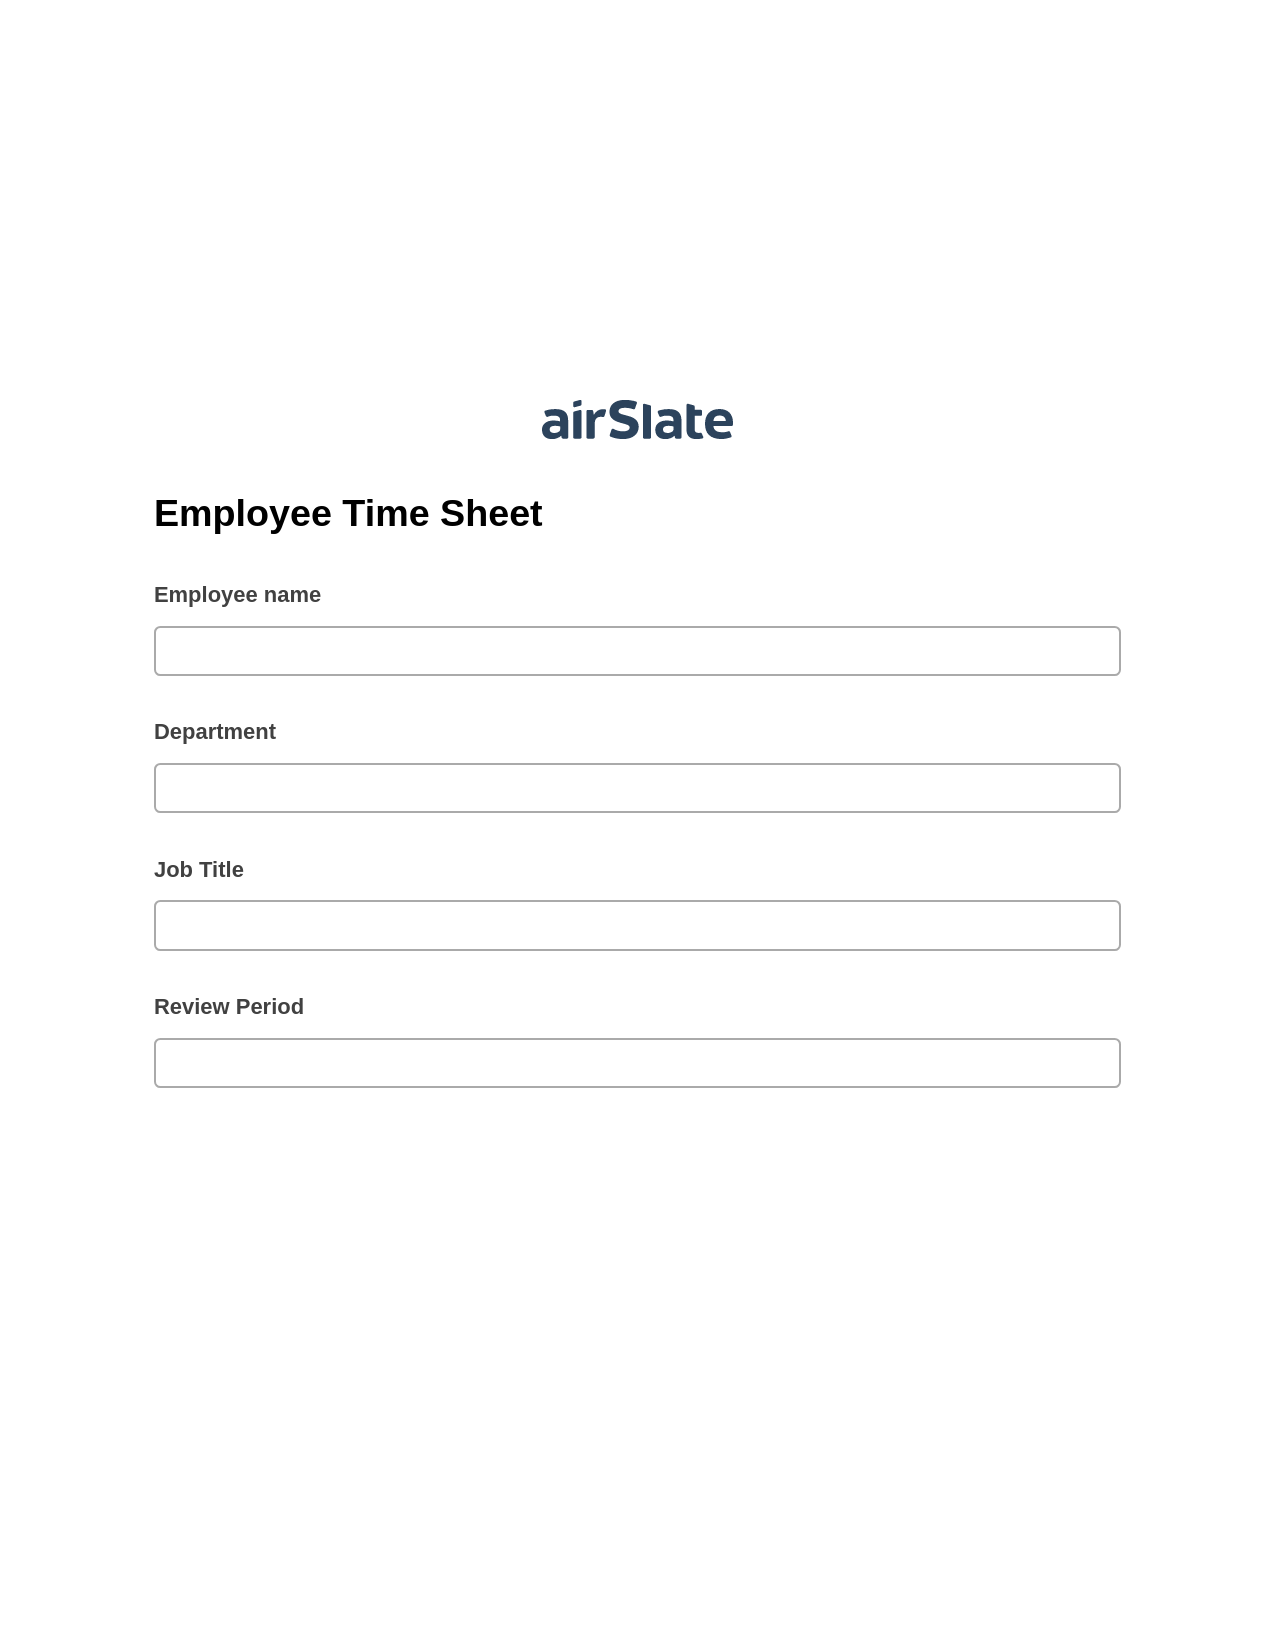 Employee Time Sheet Pre-fill from MS Dynamics 365 Records, Email Notification Bot, Export to Salesforce Record Bot